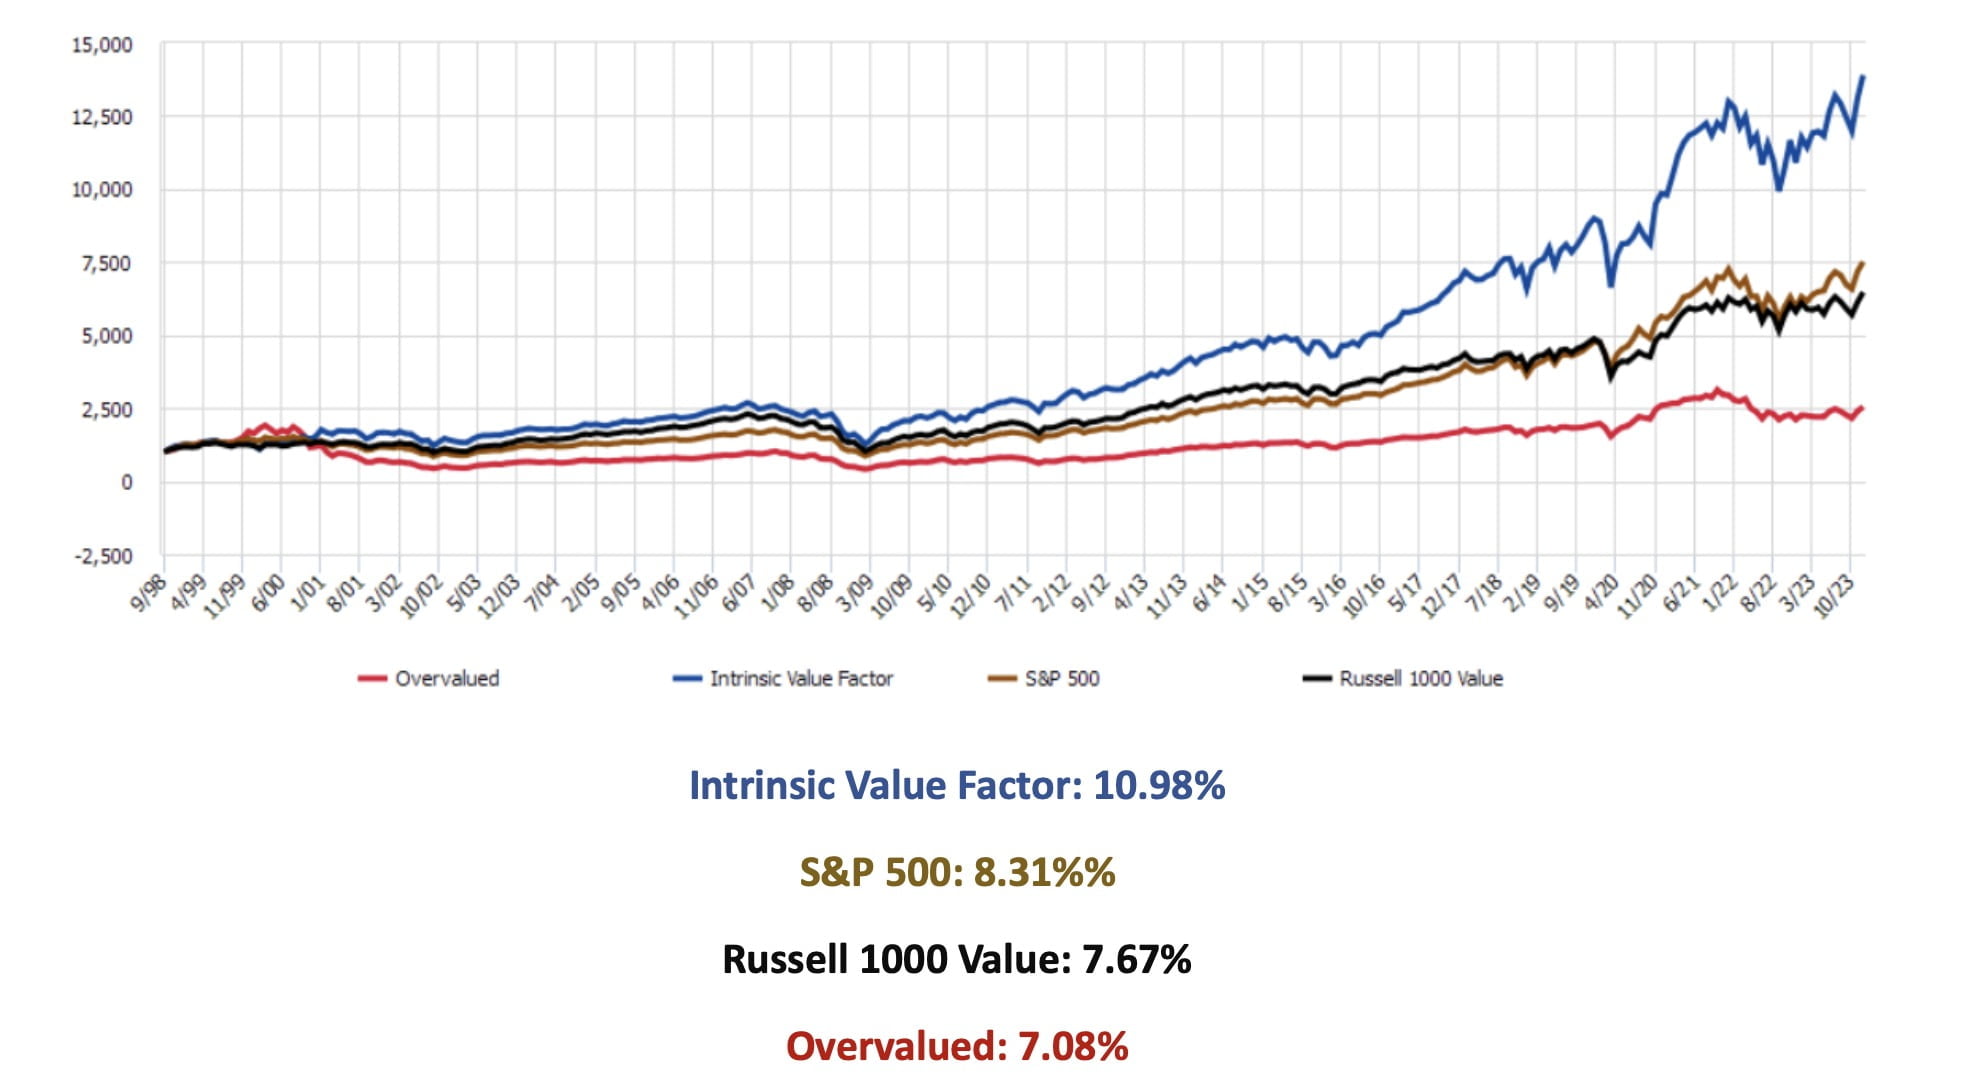 Intrinsic Value Factor vs SPY and Russell 1000 Value Long-Term Performance 